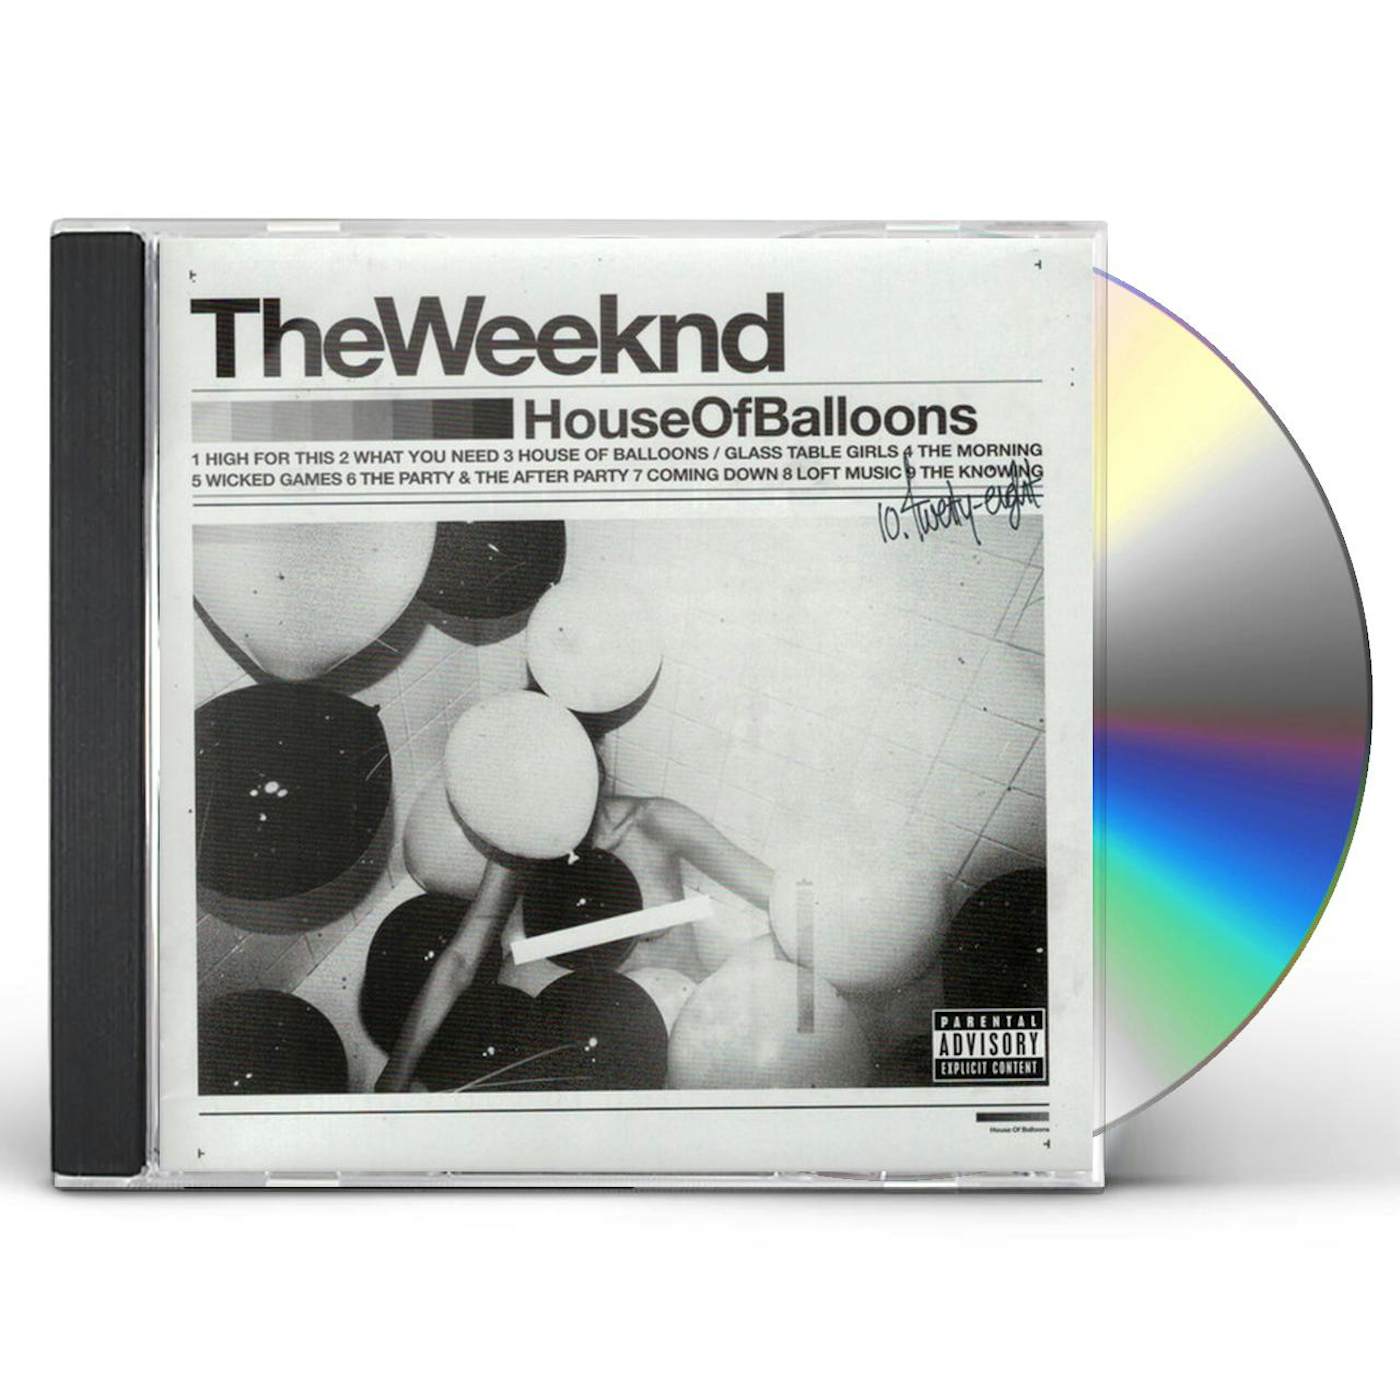 The Weeknd HOUSE OF BALLOONS CD